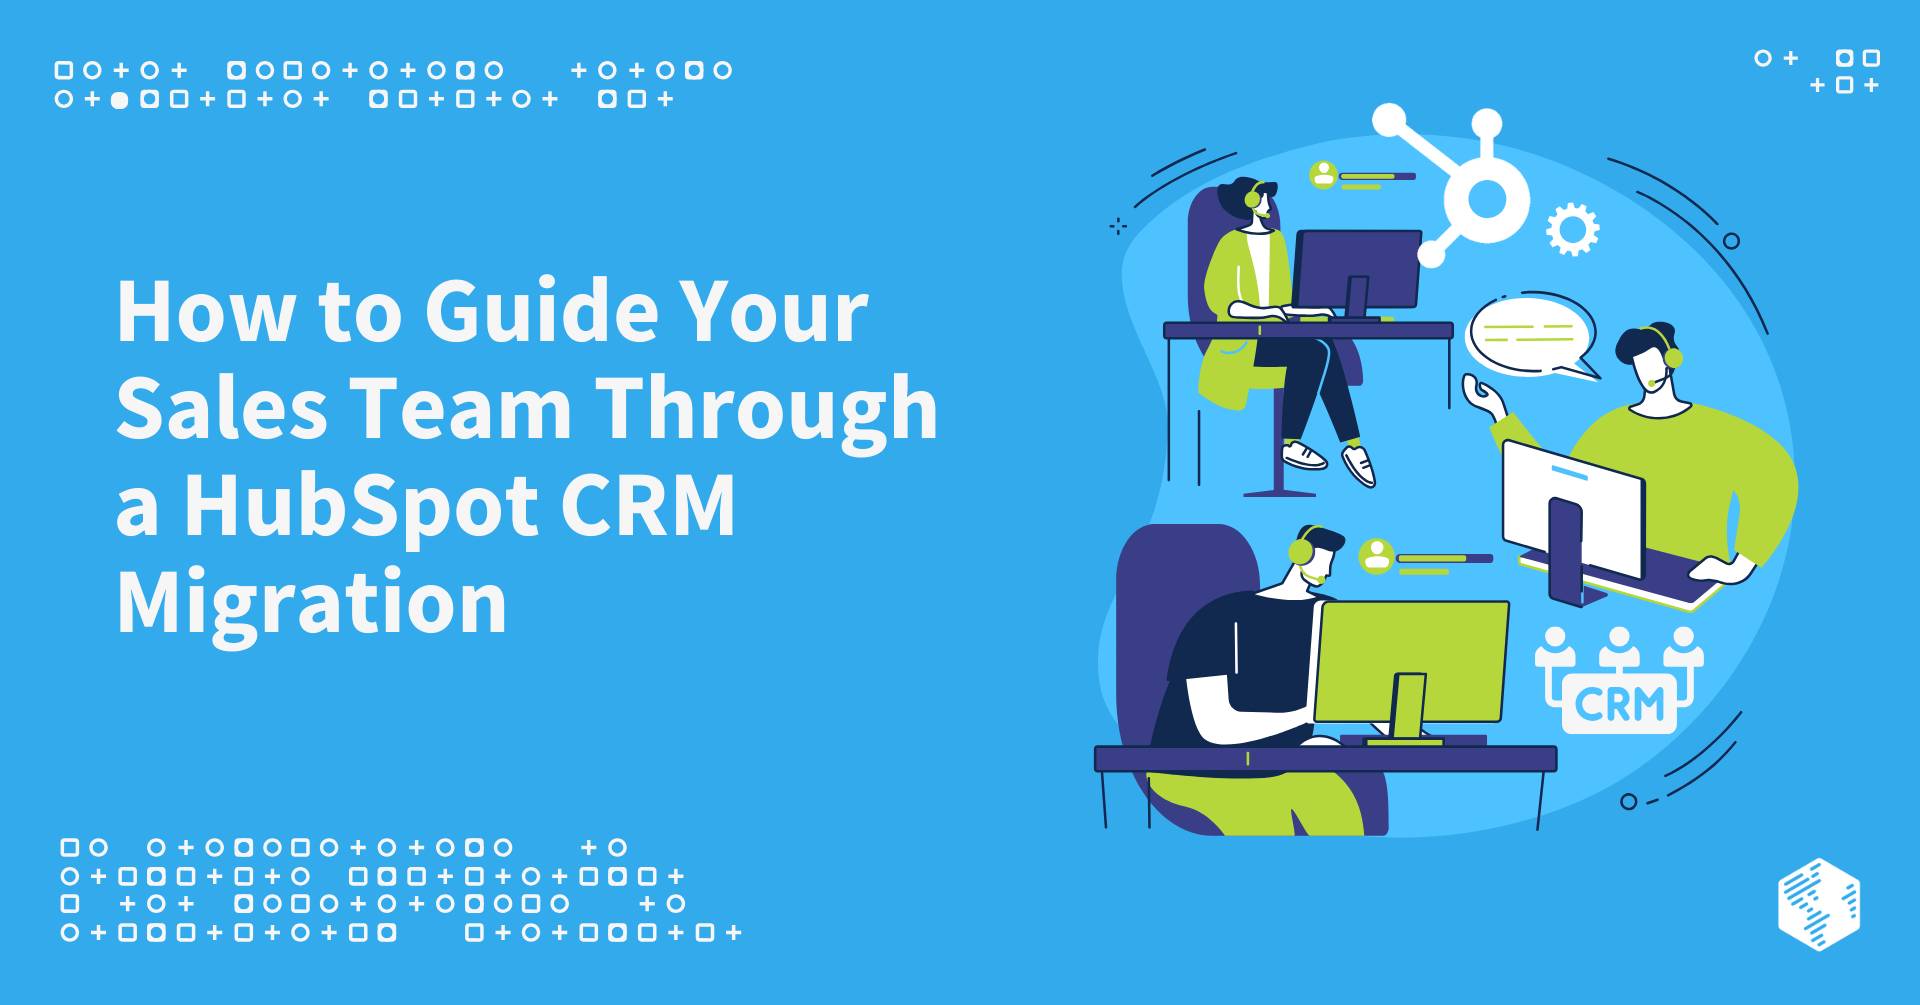 How to Guide Your Sales Team Through a HubSpot CRM Migration